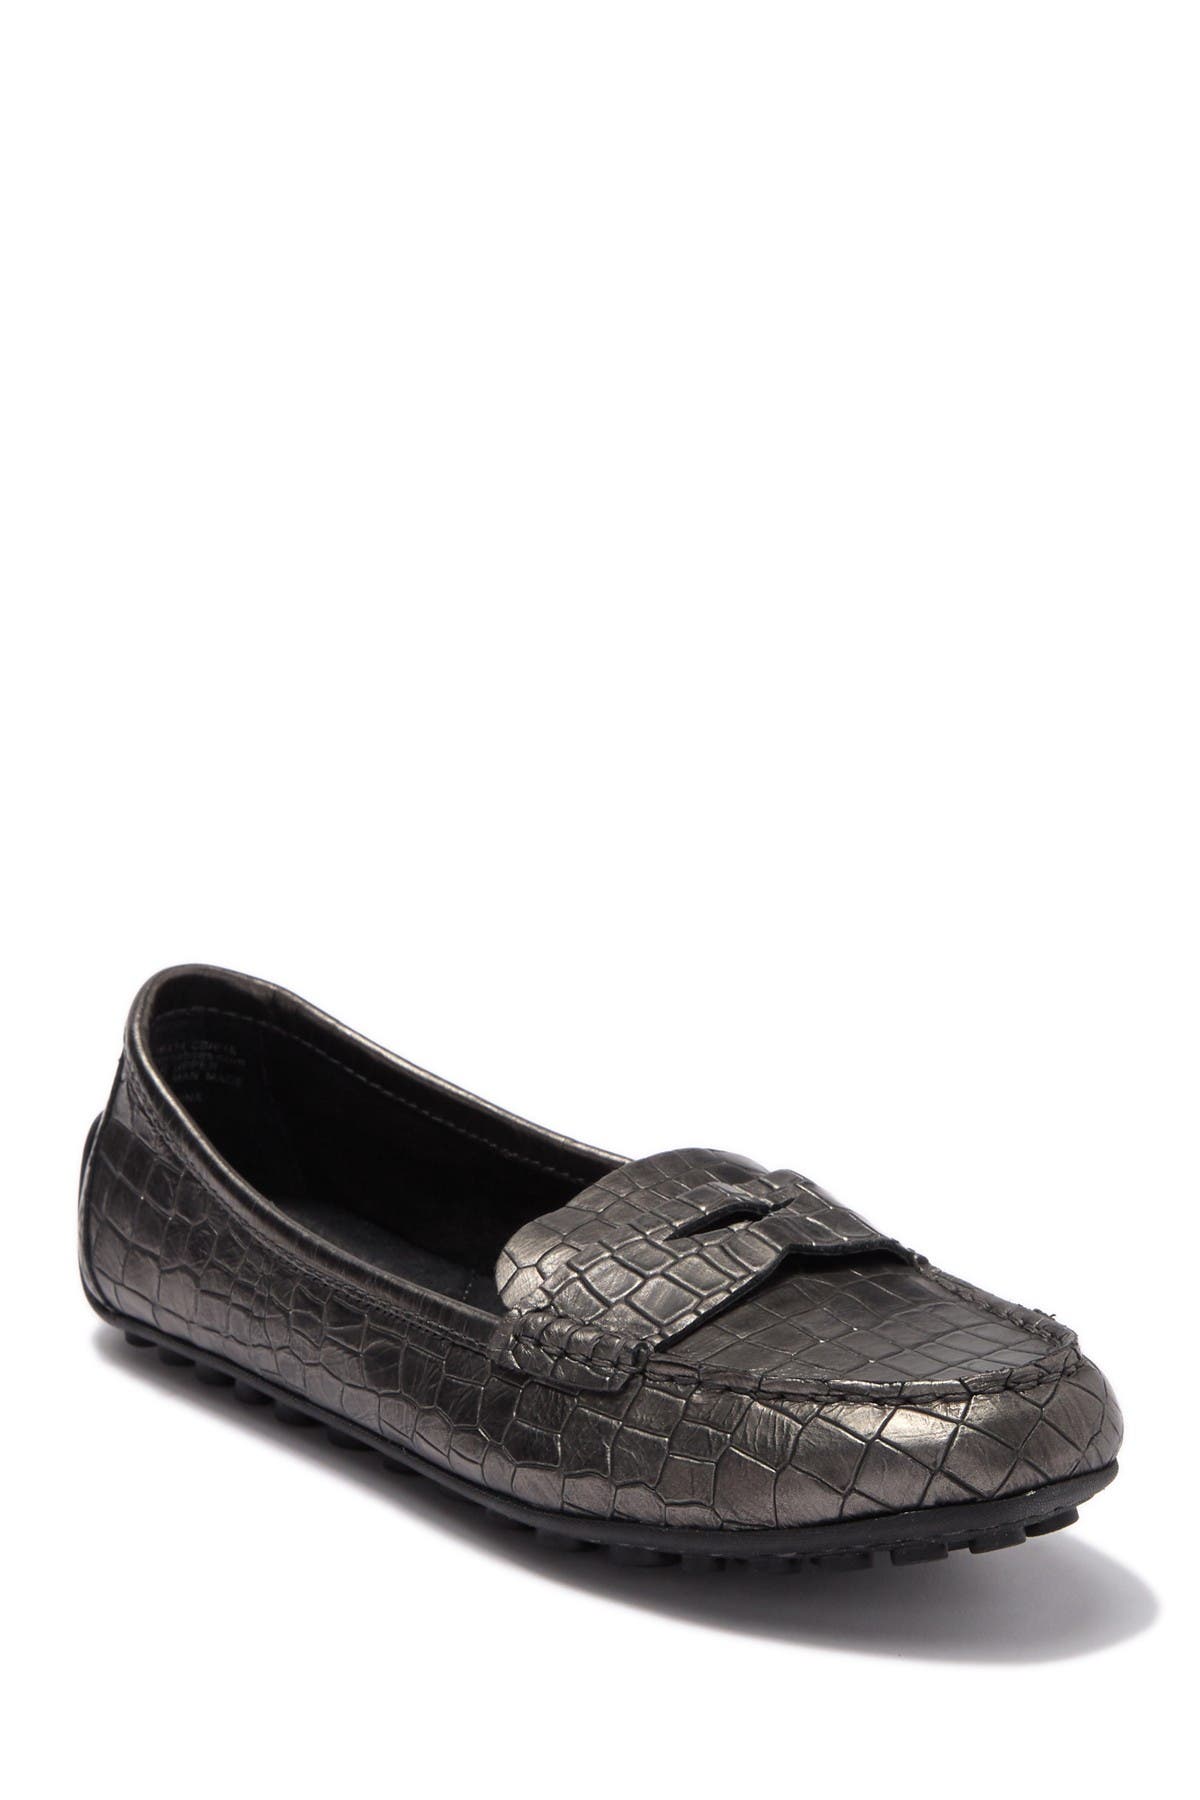 Malena Croc Embossed Penny Loafer 